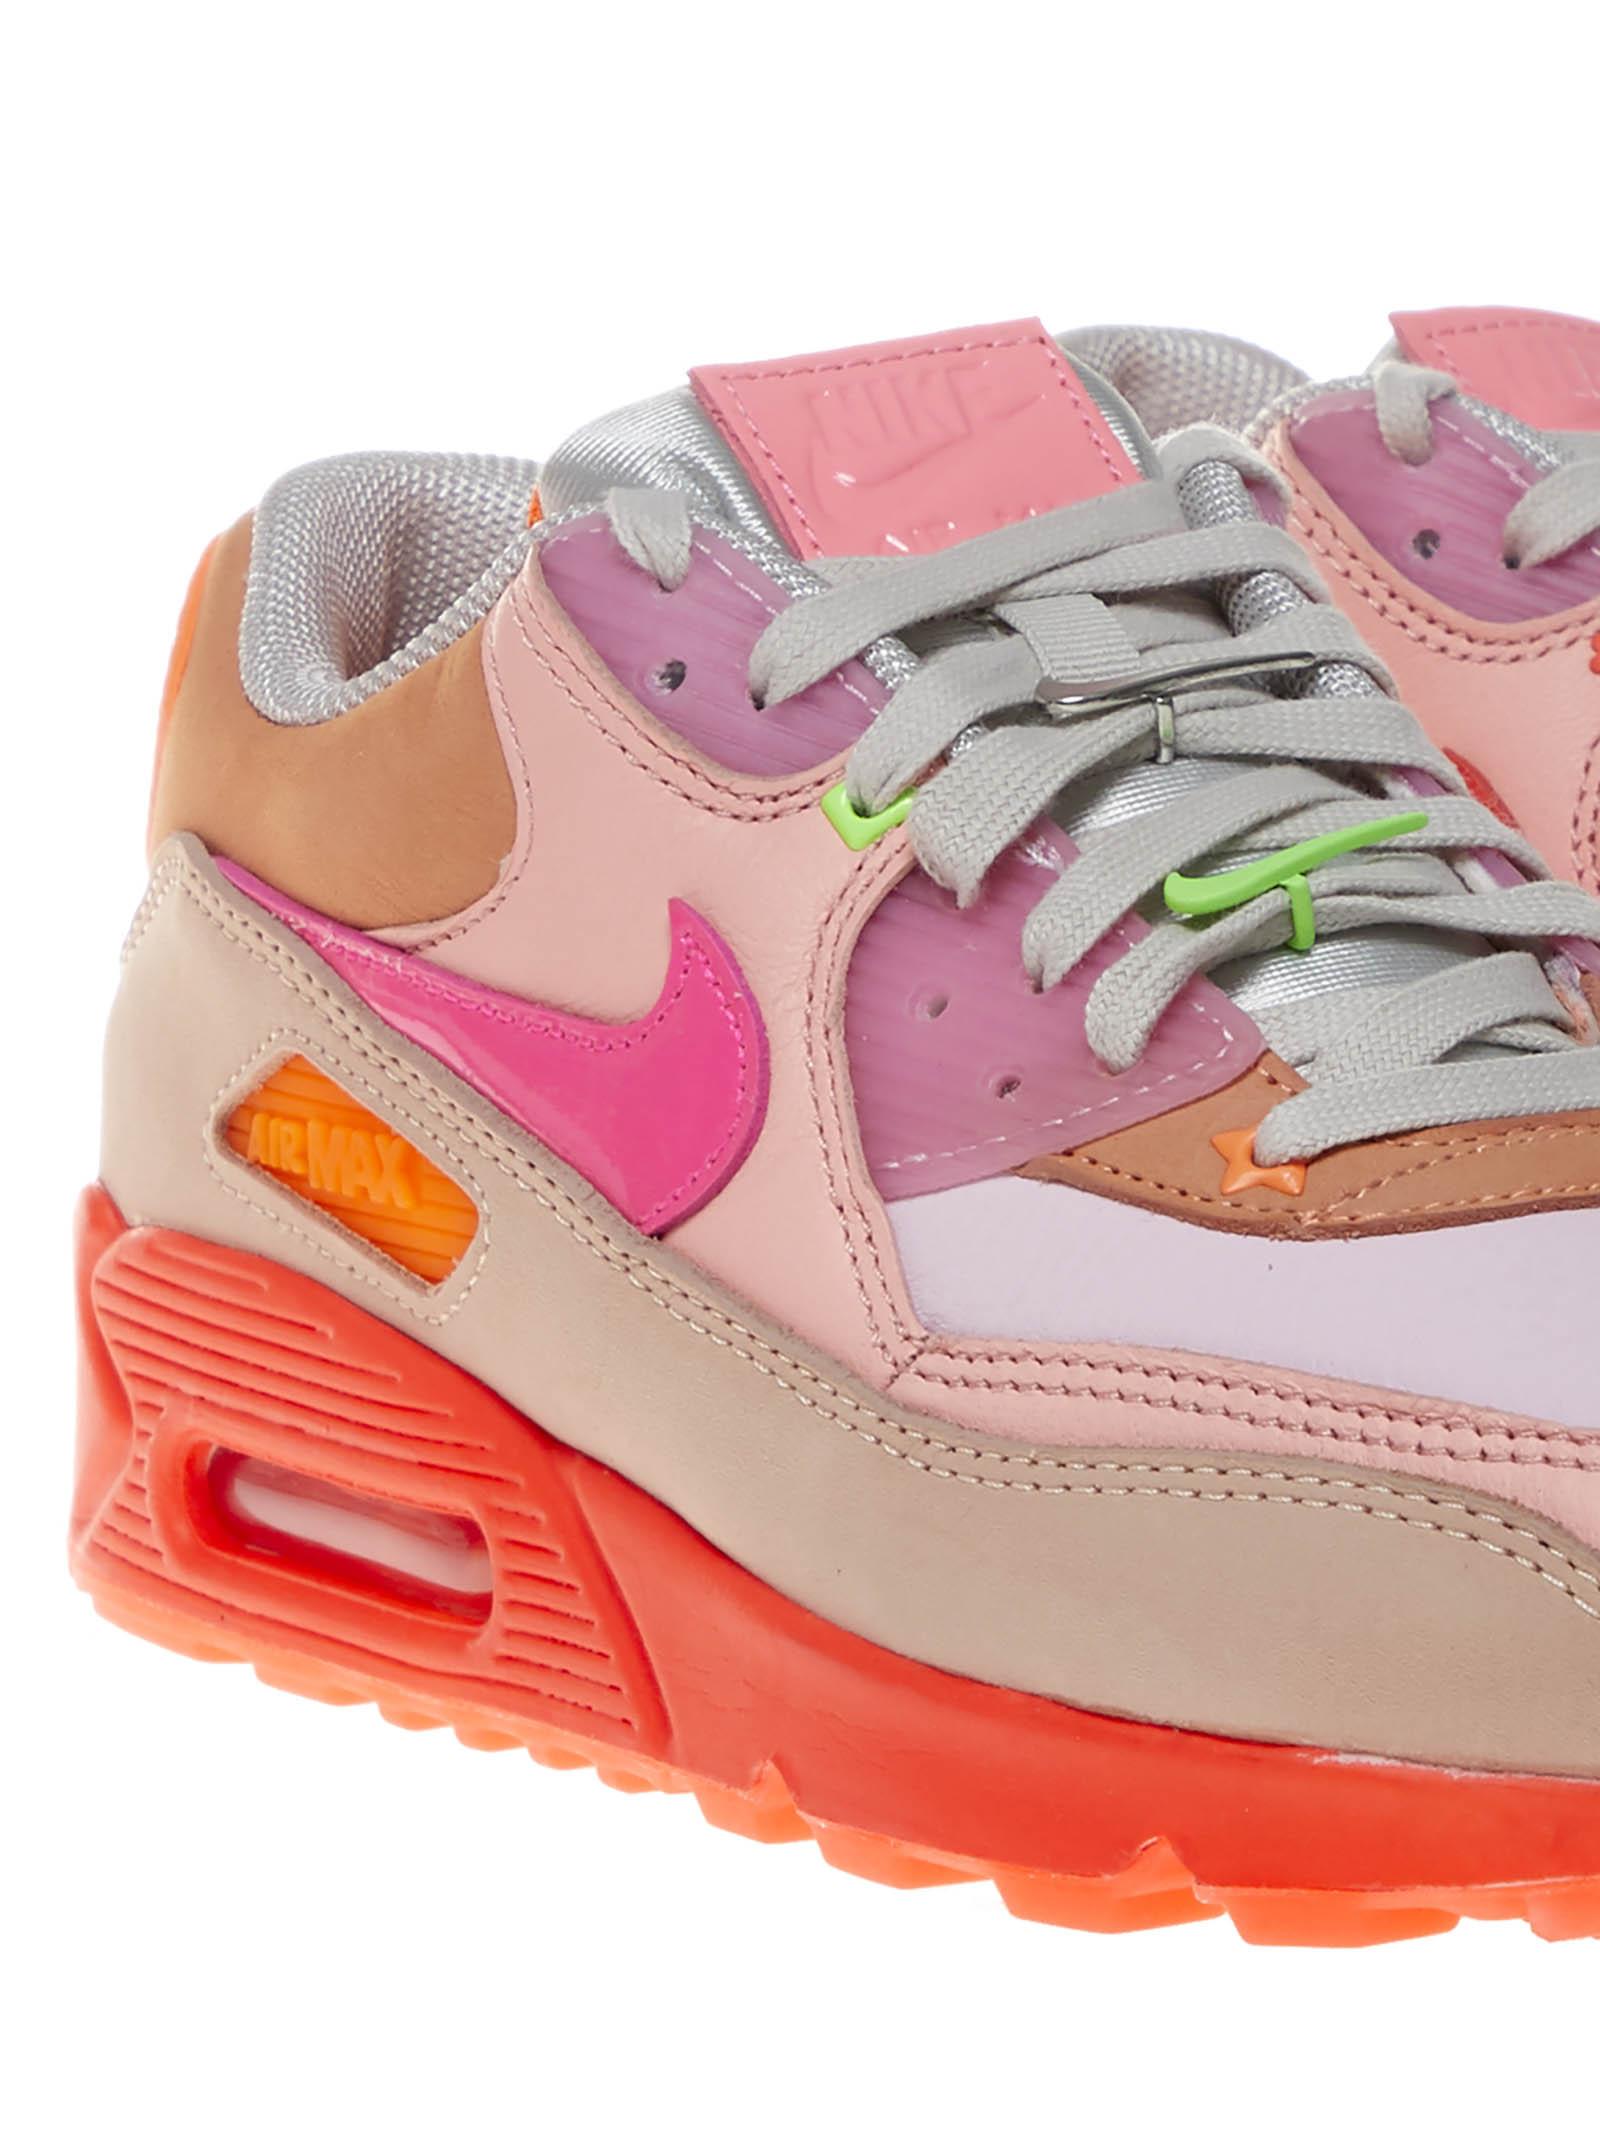 Pink And Orange Air Max 90 Sneakers With Layered And Air Technology. | Lyst